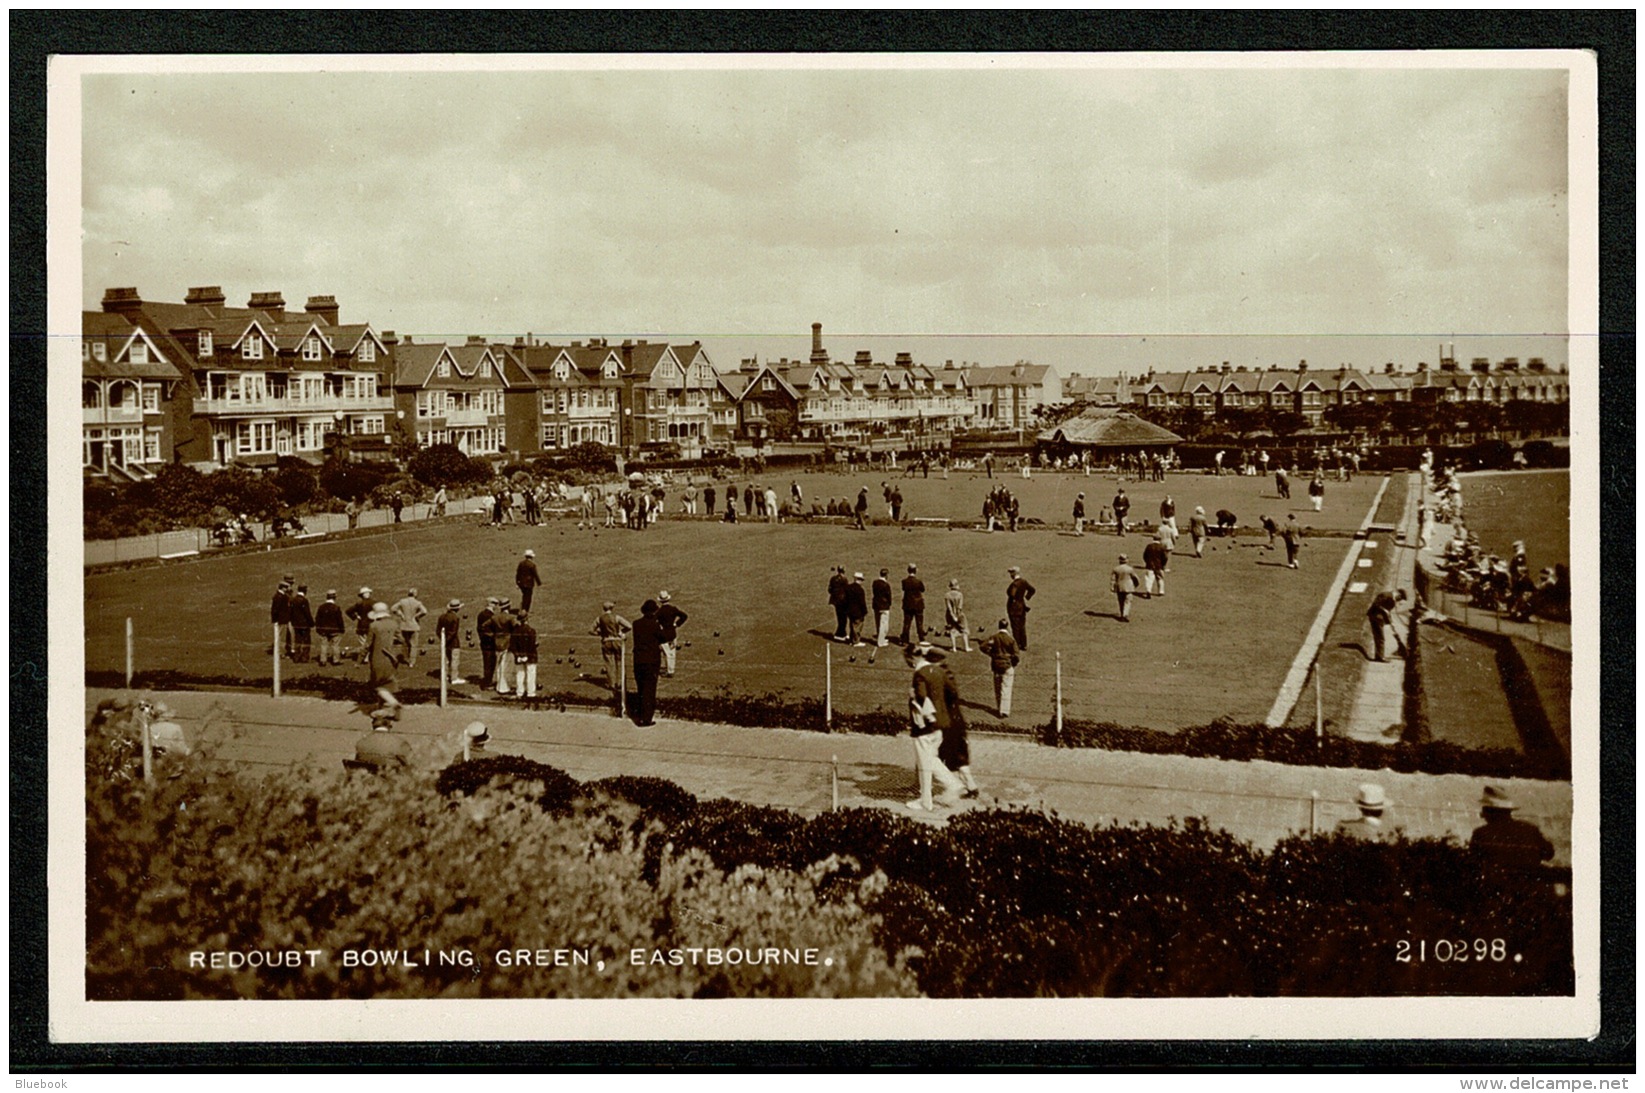 RB 1179 - Real Photo Postcard - Redoubt Bowling Green - Eastbourne Sussex - Eastbourne